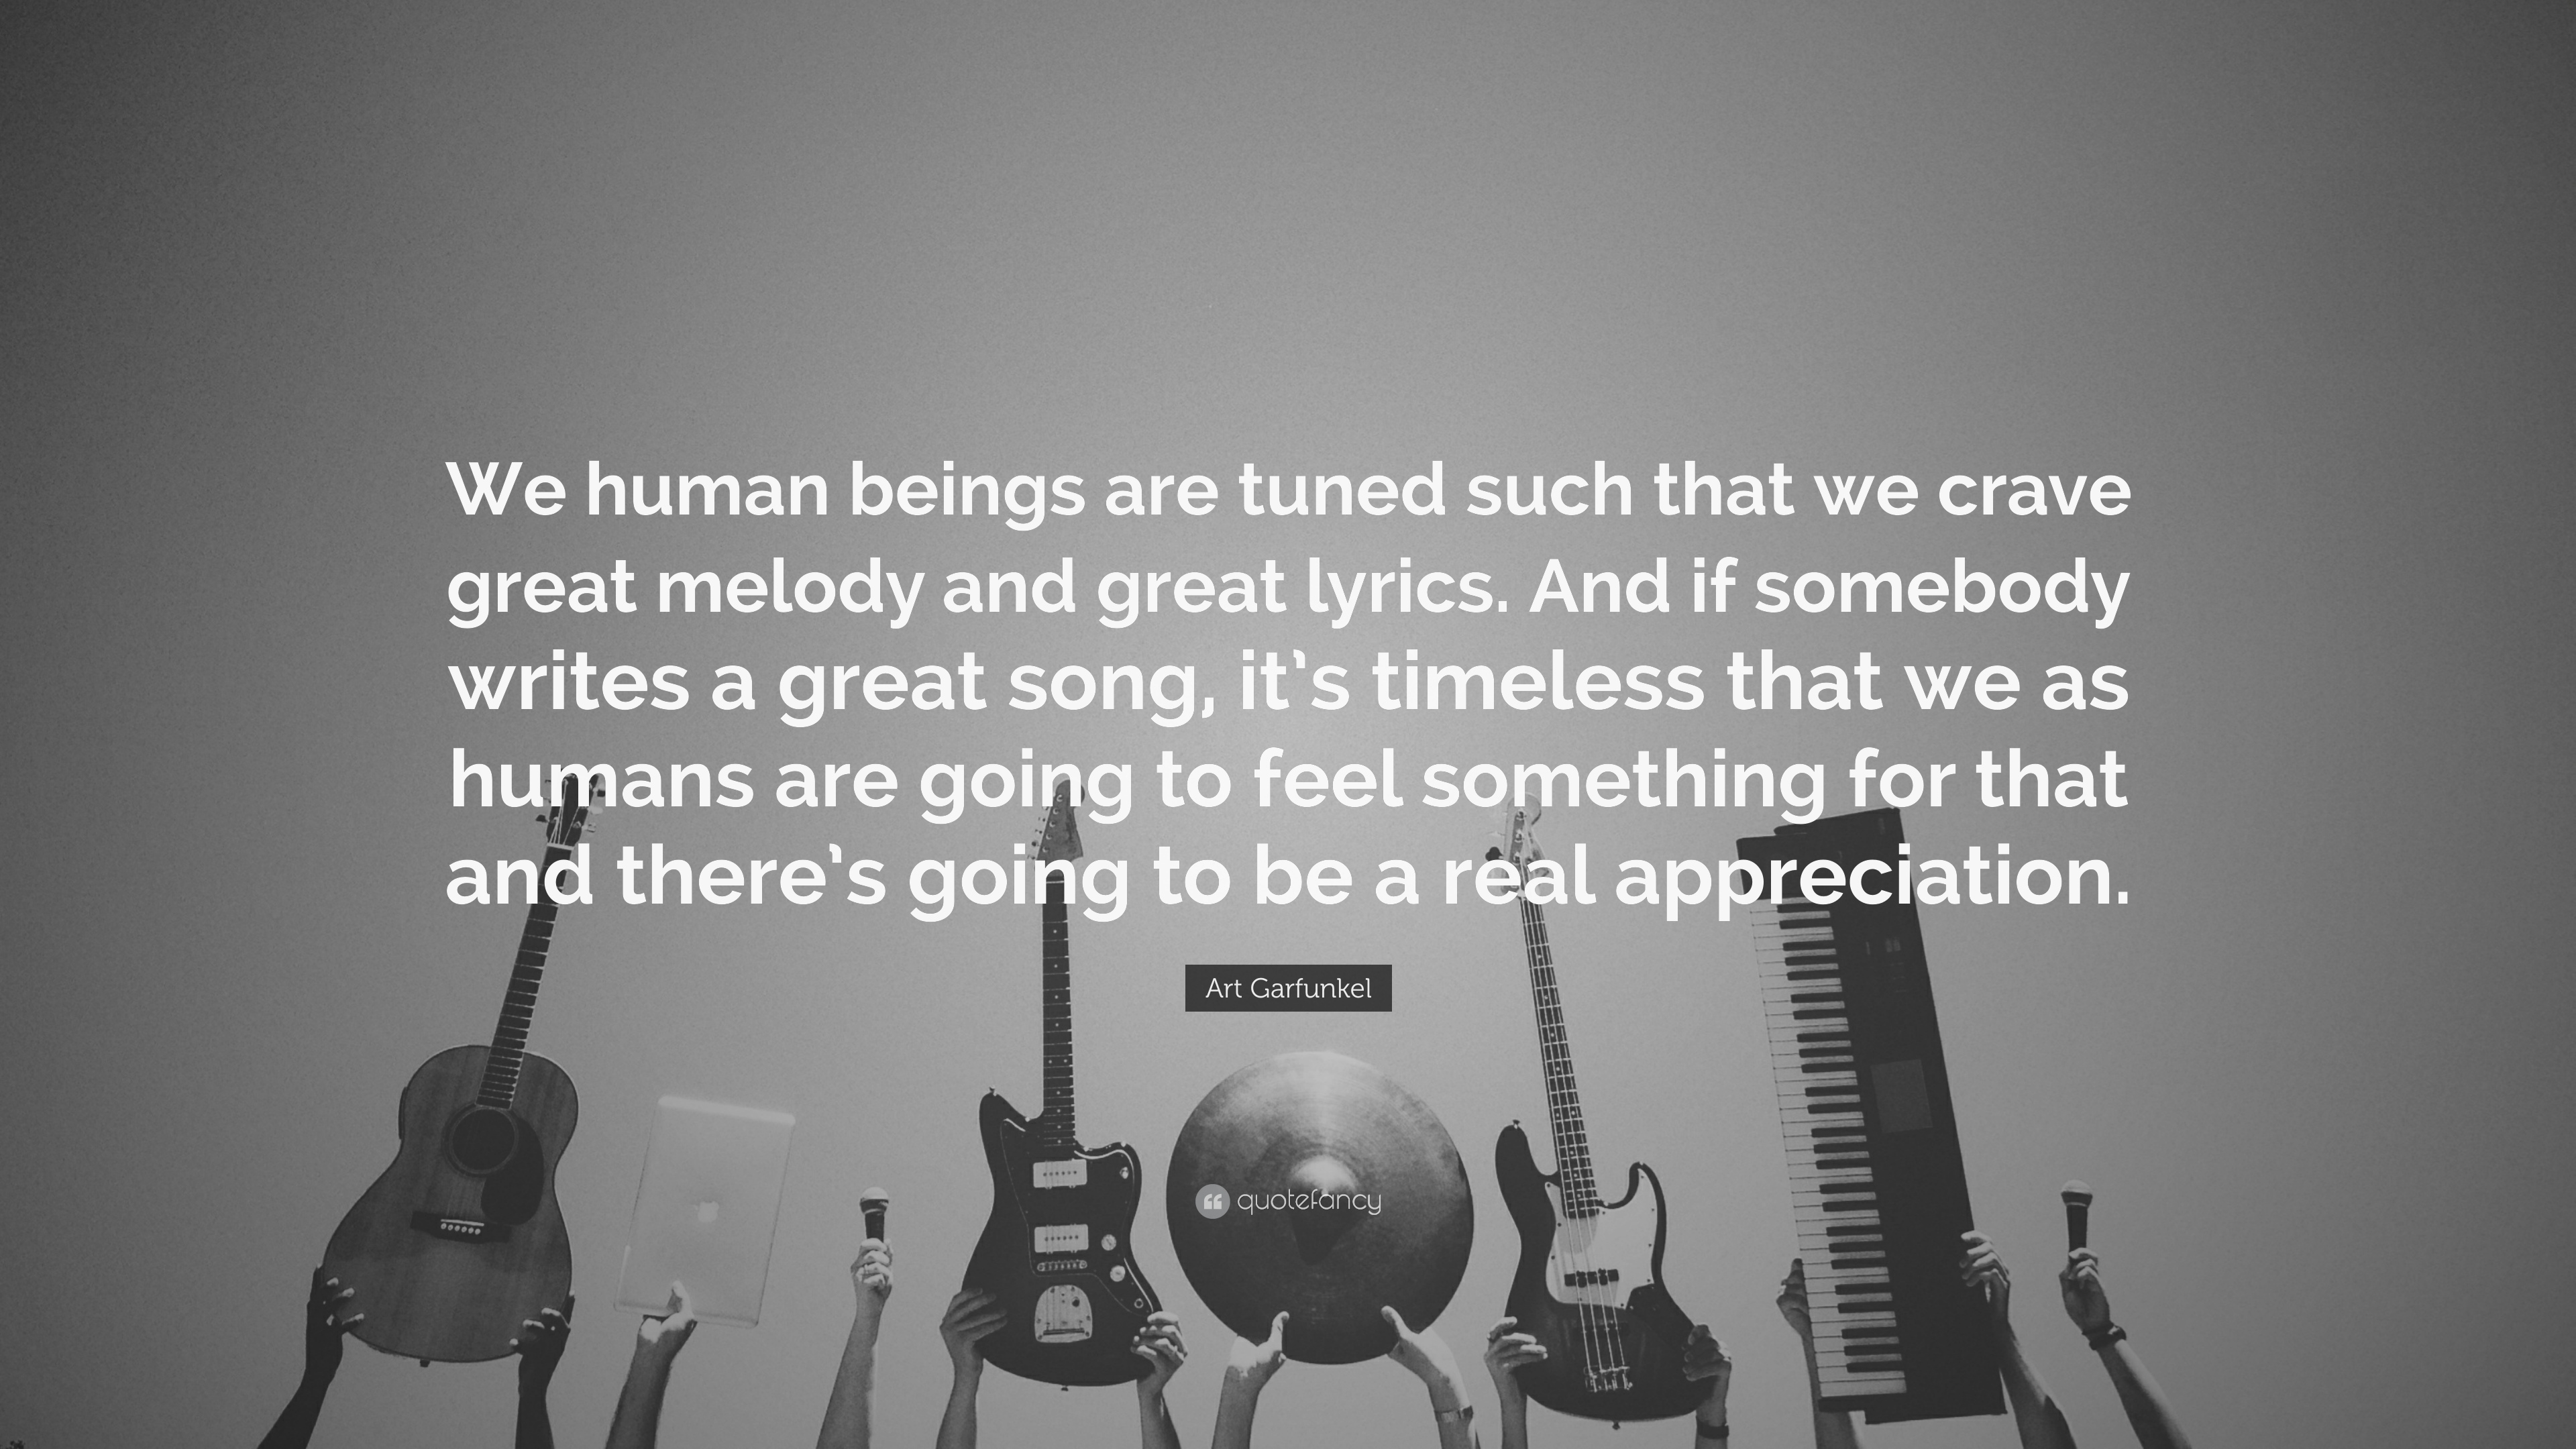 Art Garfunkel Quote: “We human beings are tuned such that we crave